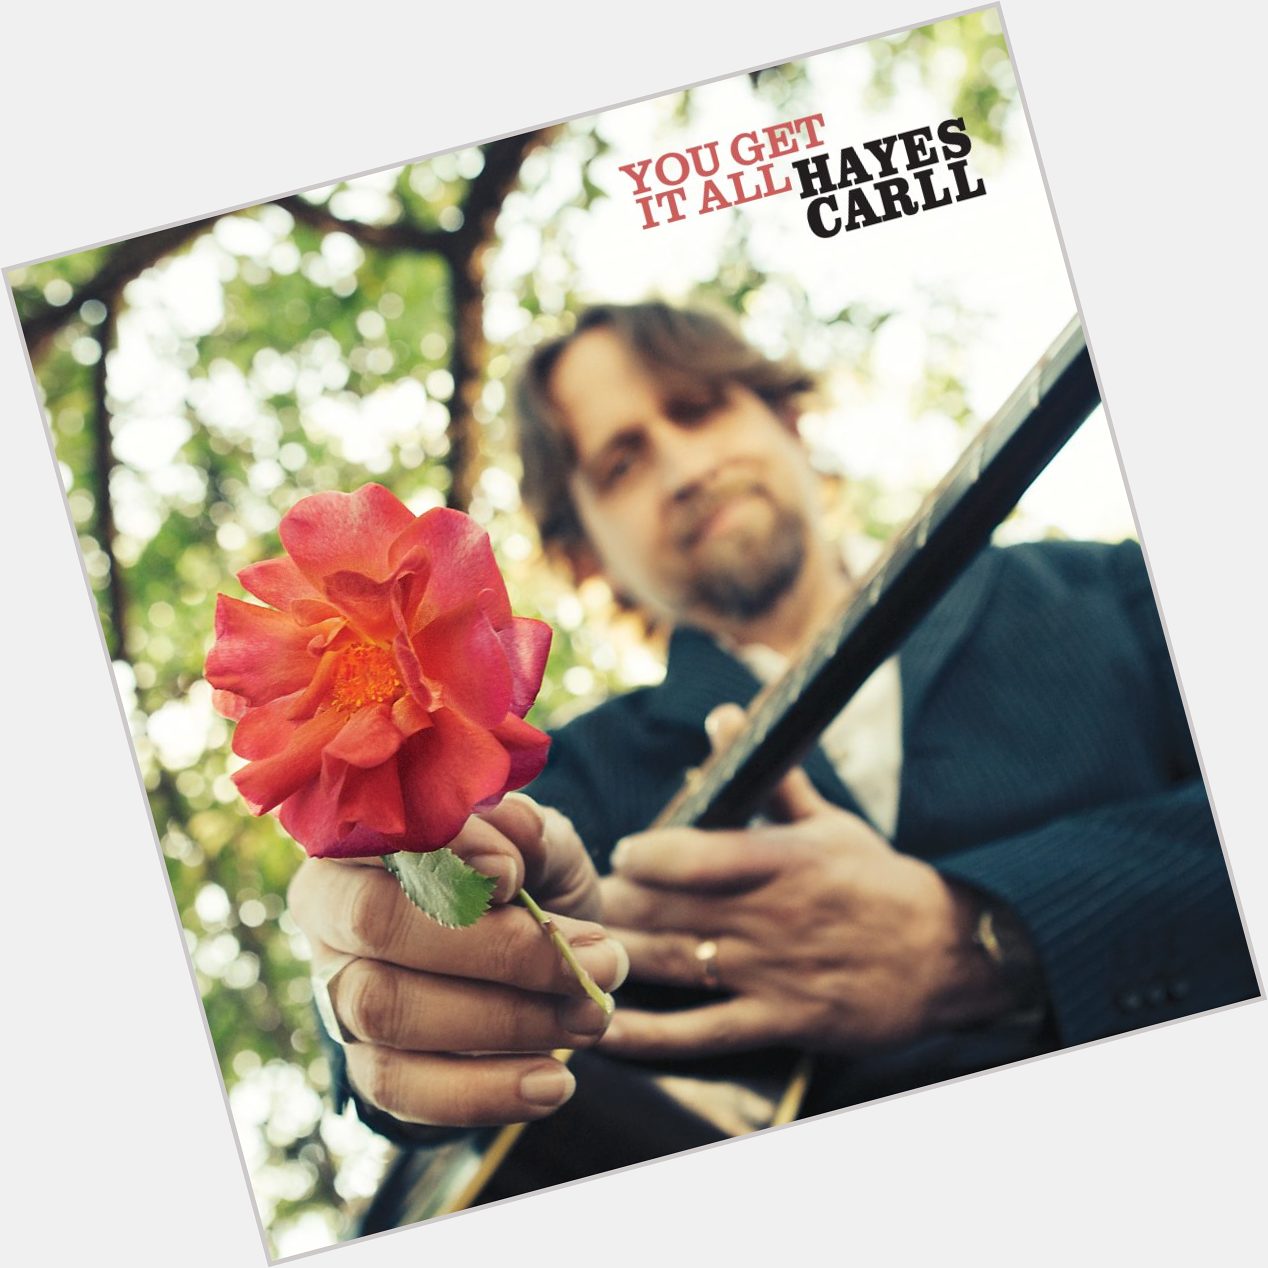 Hayes Carll hairstyle 3